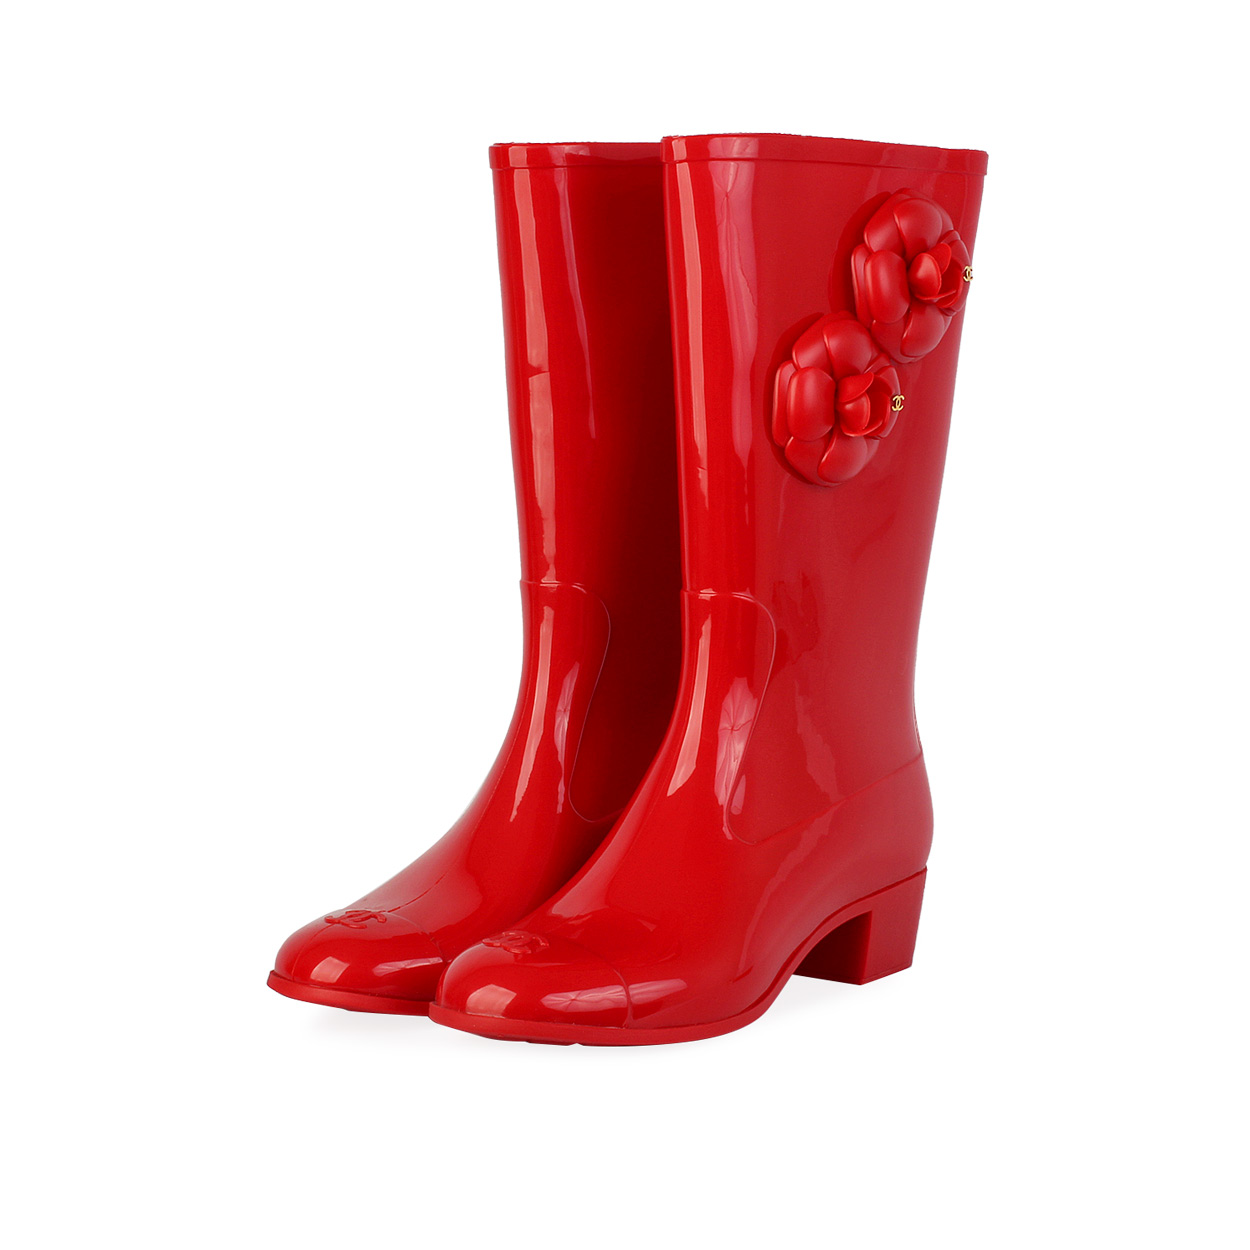 CHANEL Rubber Camellia Flower Rain Boots Red - S: 41 (7.5)